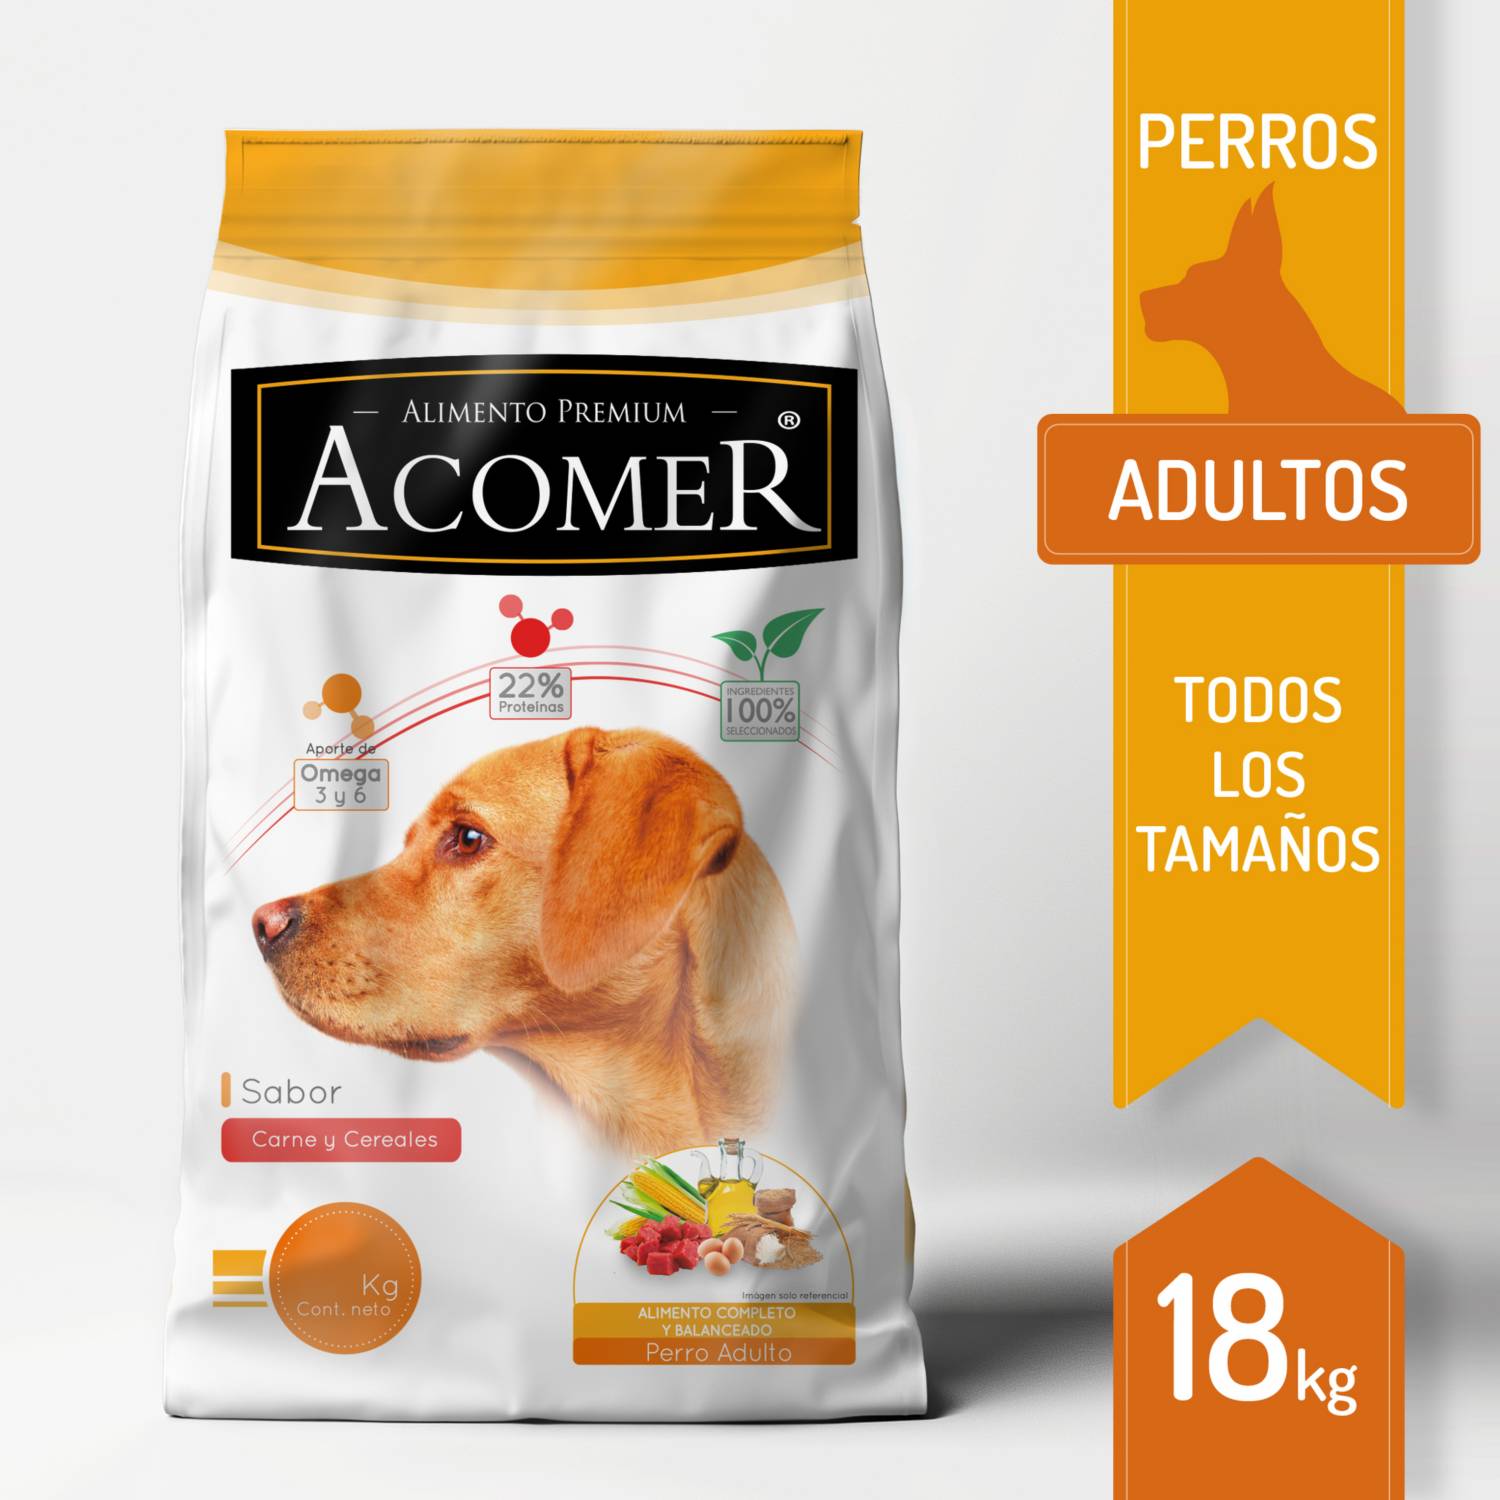 Adult Large Breed Recipe: alimento para perros sin cereales